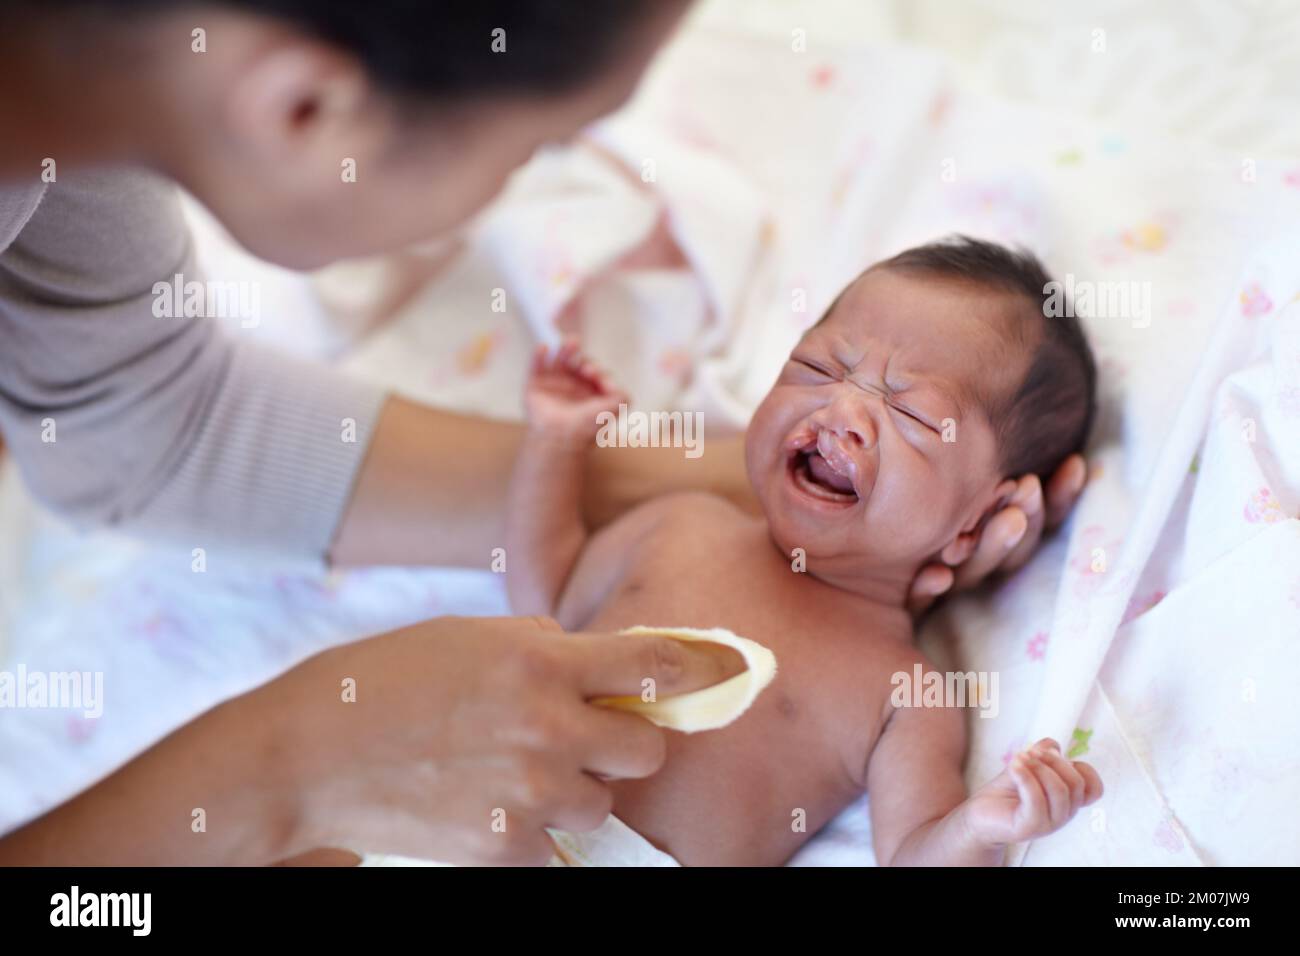 Nobody enjoys bathtime. A young mother cleaning her infant who has a cleft palate. Stock Photo